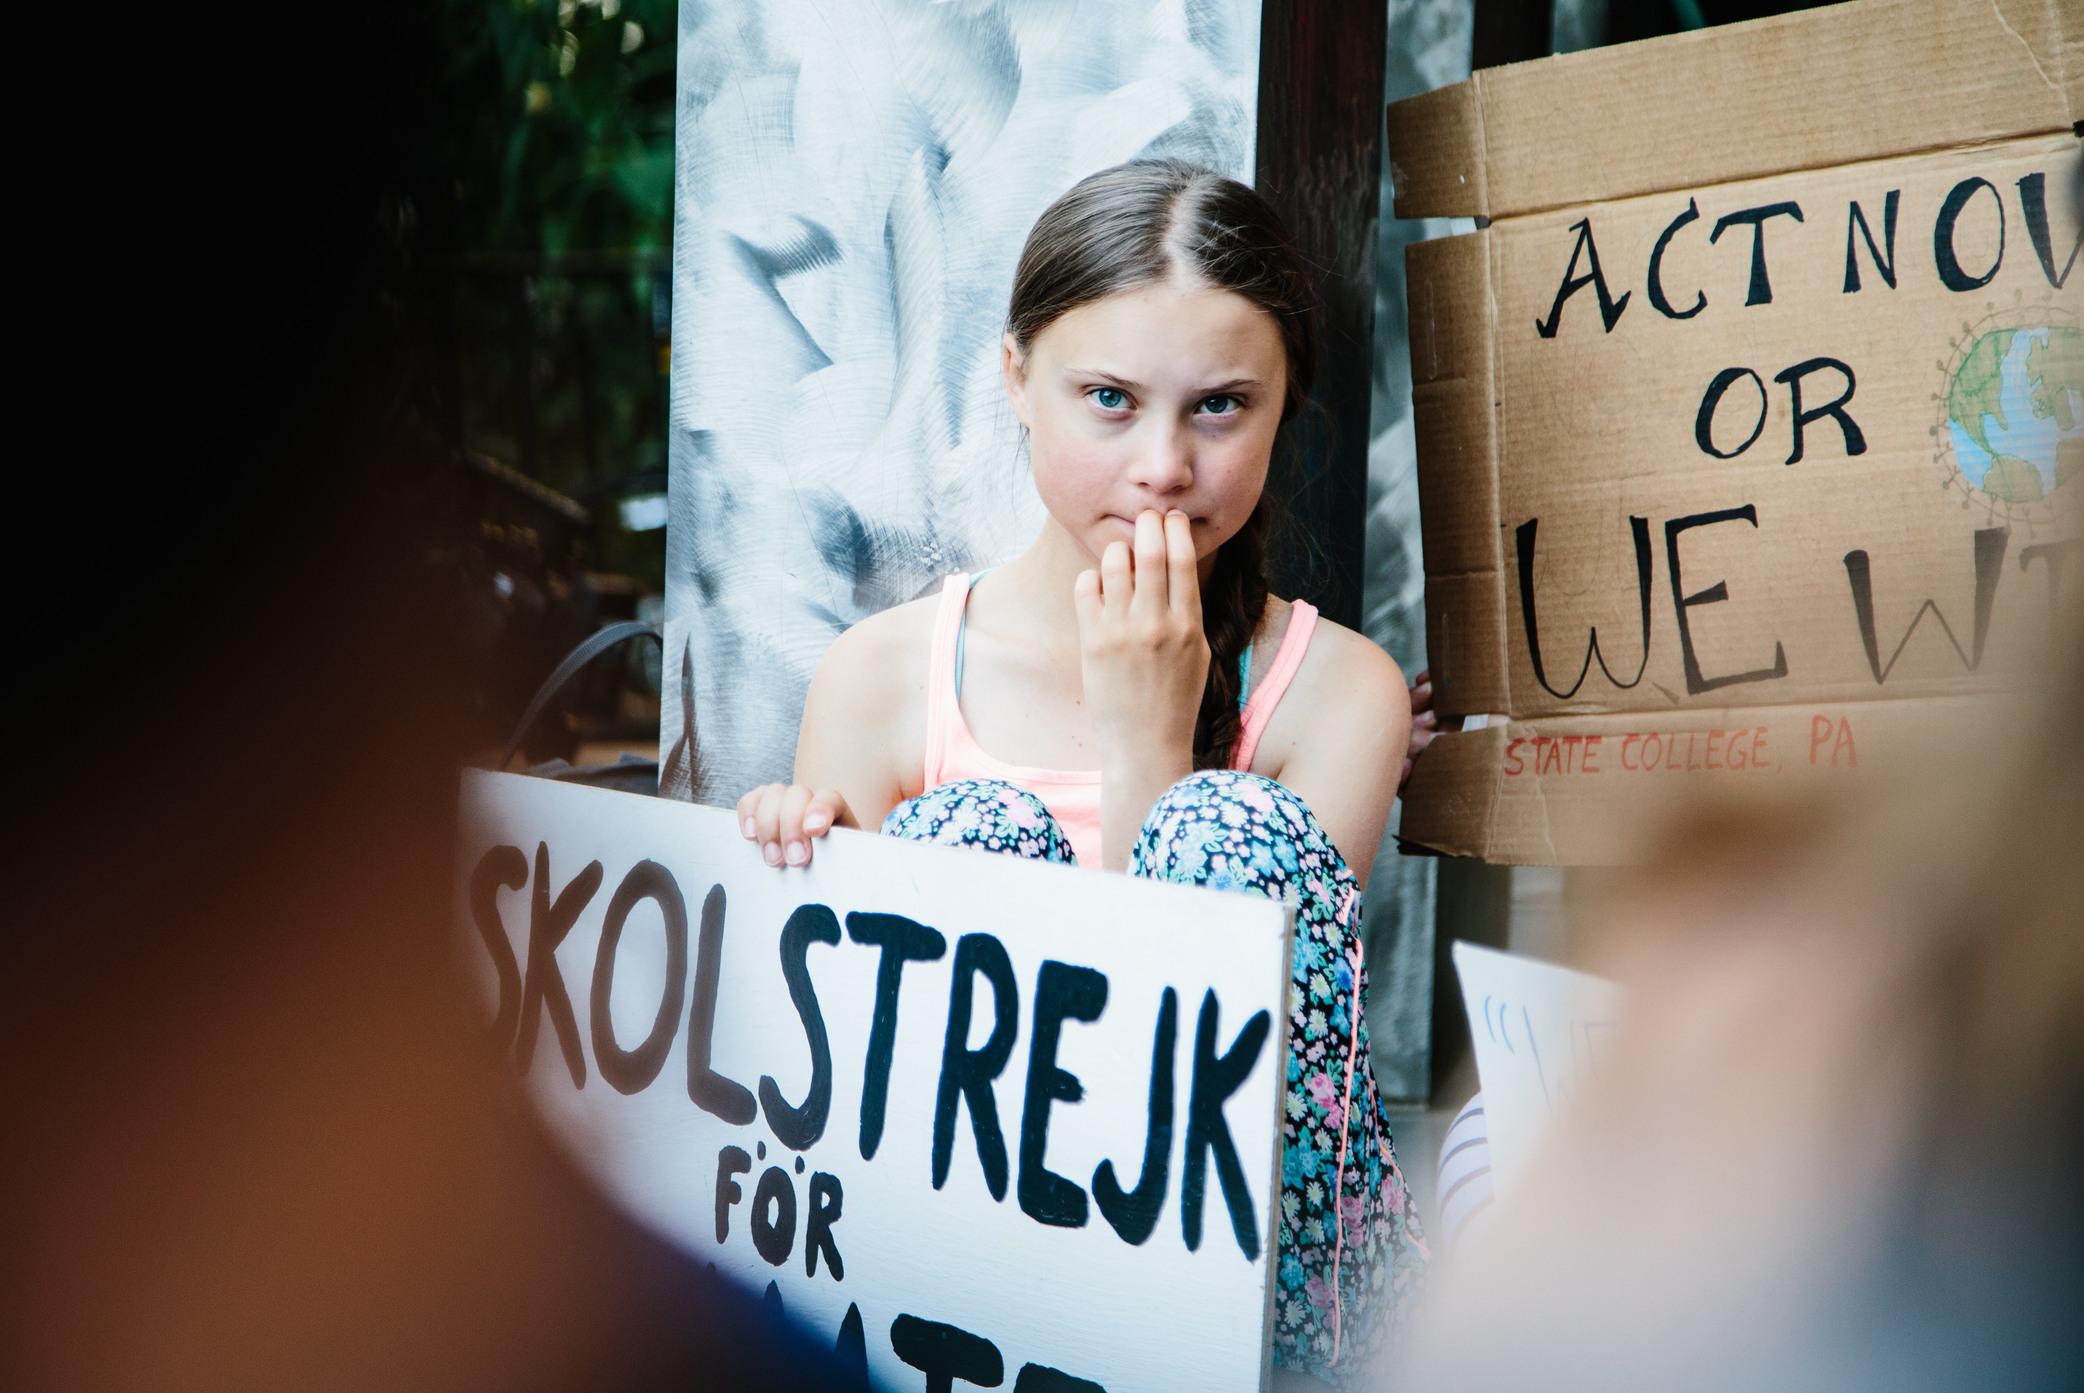 Greta Thunberg with a sign that says 'School strike for the climate'. Greta Thunberg has been selected to this list of Swedish women.